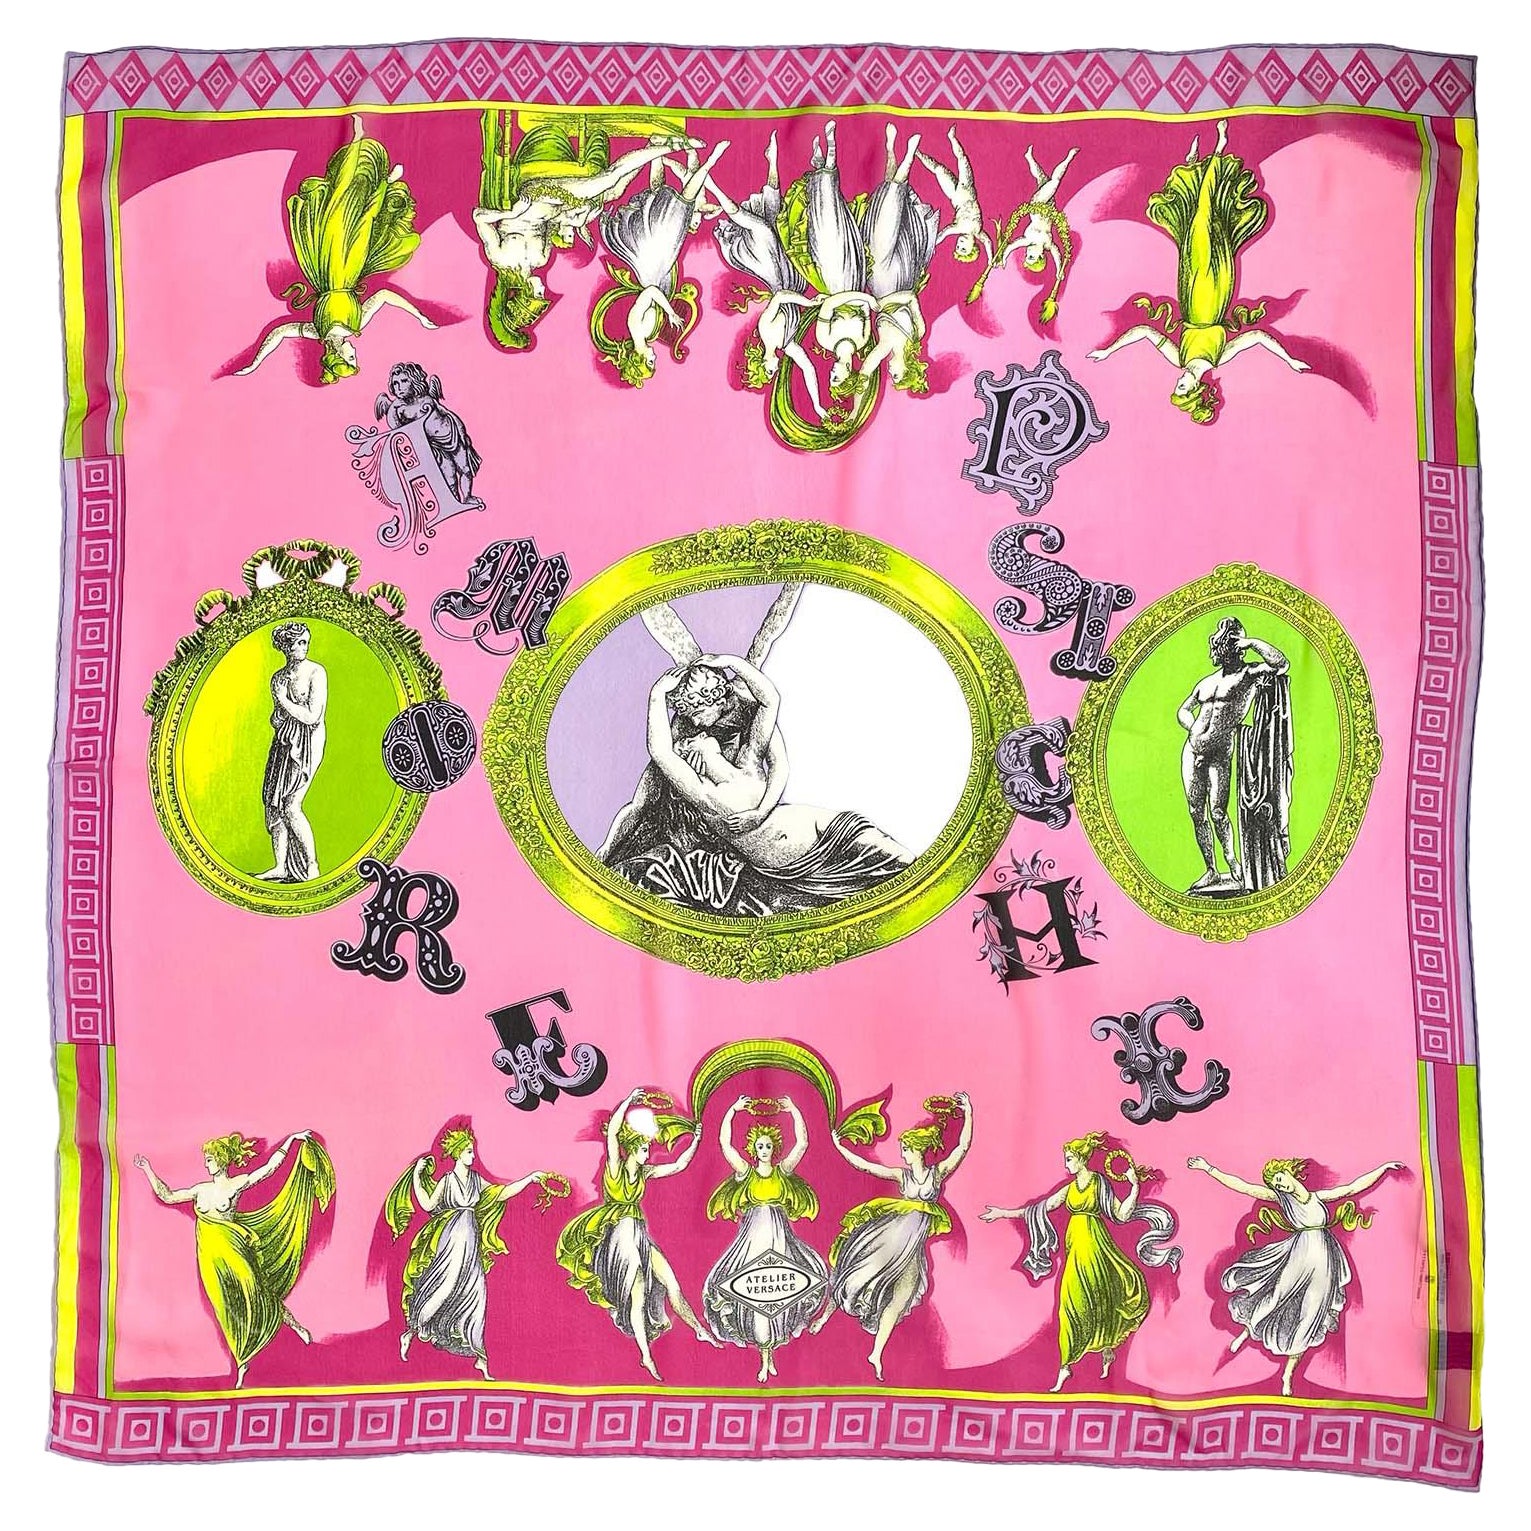 1990s Atelier Versace by Gianni Versace Amore Psiche Neon Silk Square Scarf New